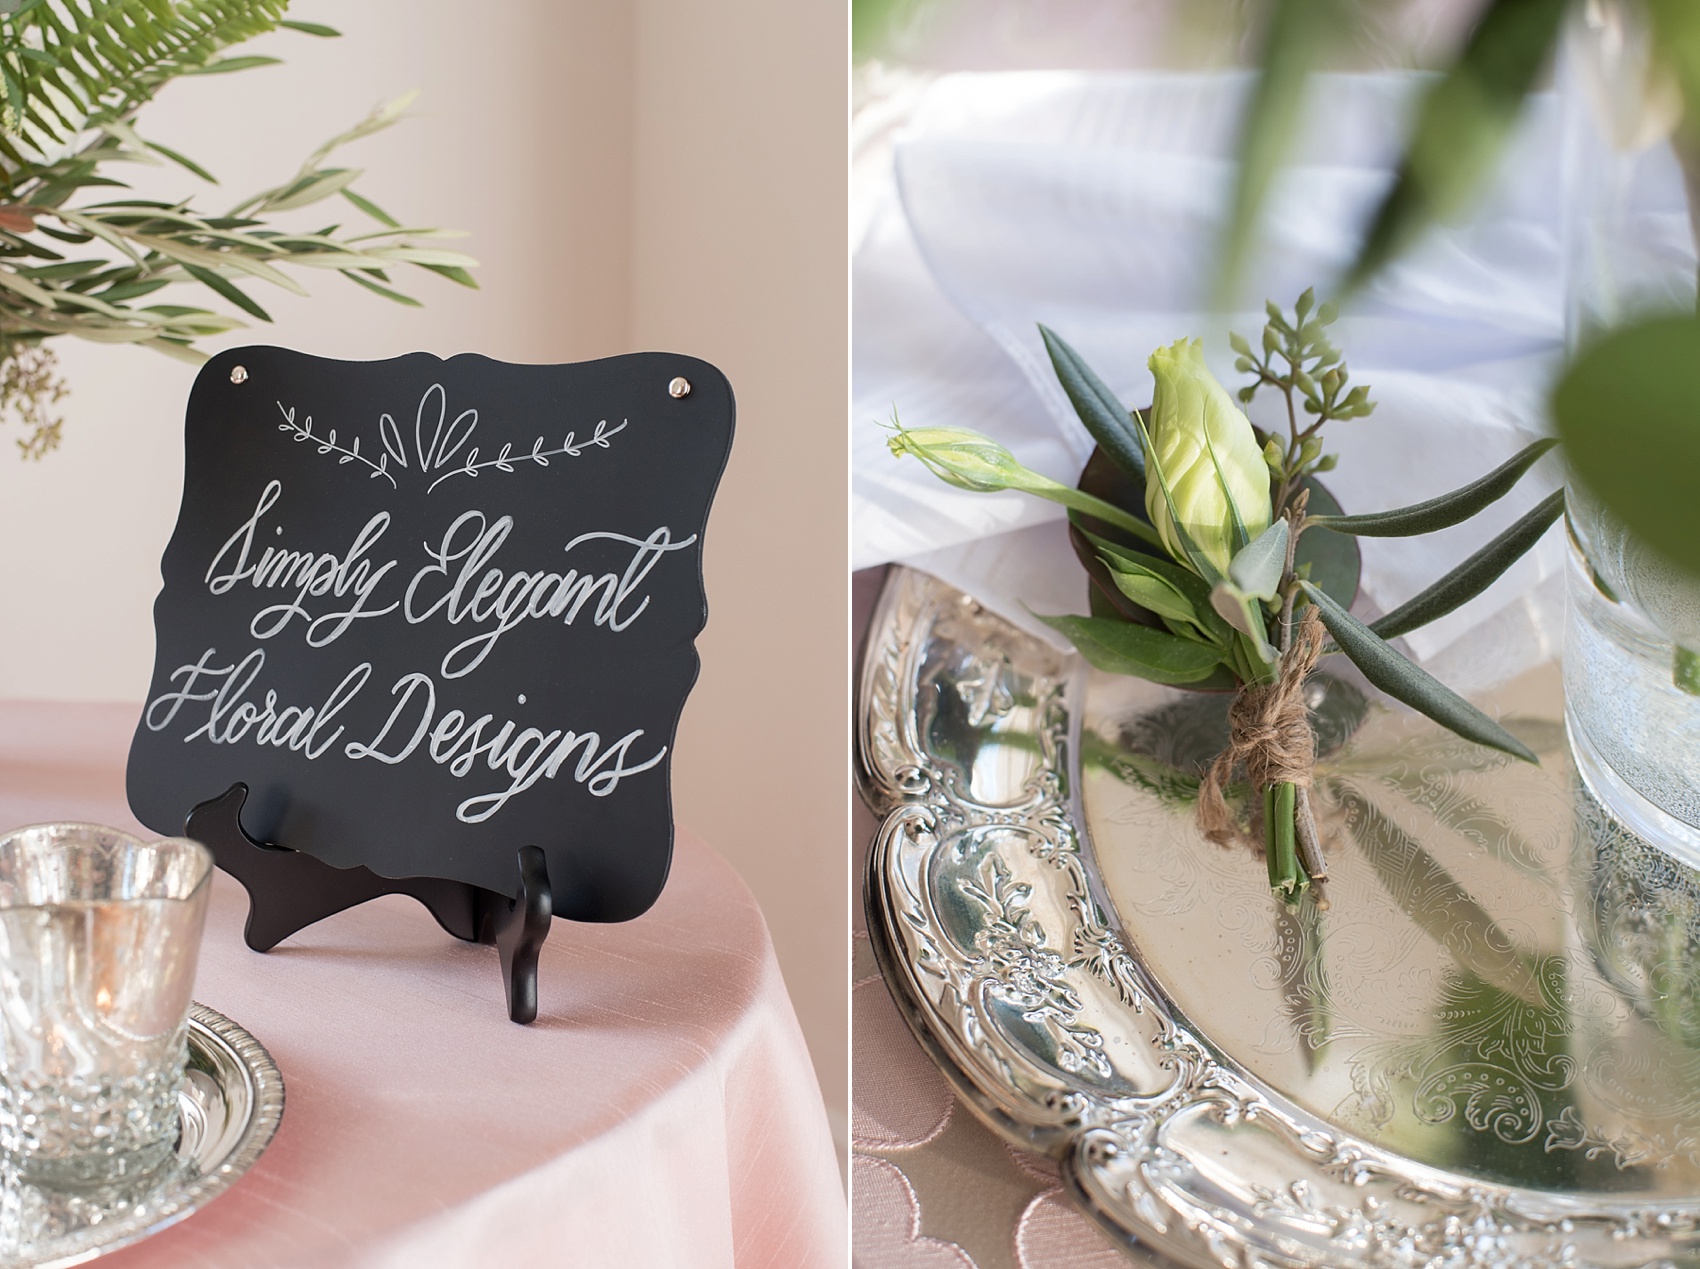 Raleigh North Carolina wedding photographer visits Merrimon-Wynne bridal event, featuring One and Only custom stationary and calligraphy and Simply Elegant floral design.